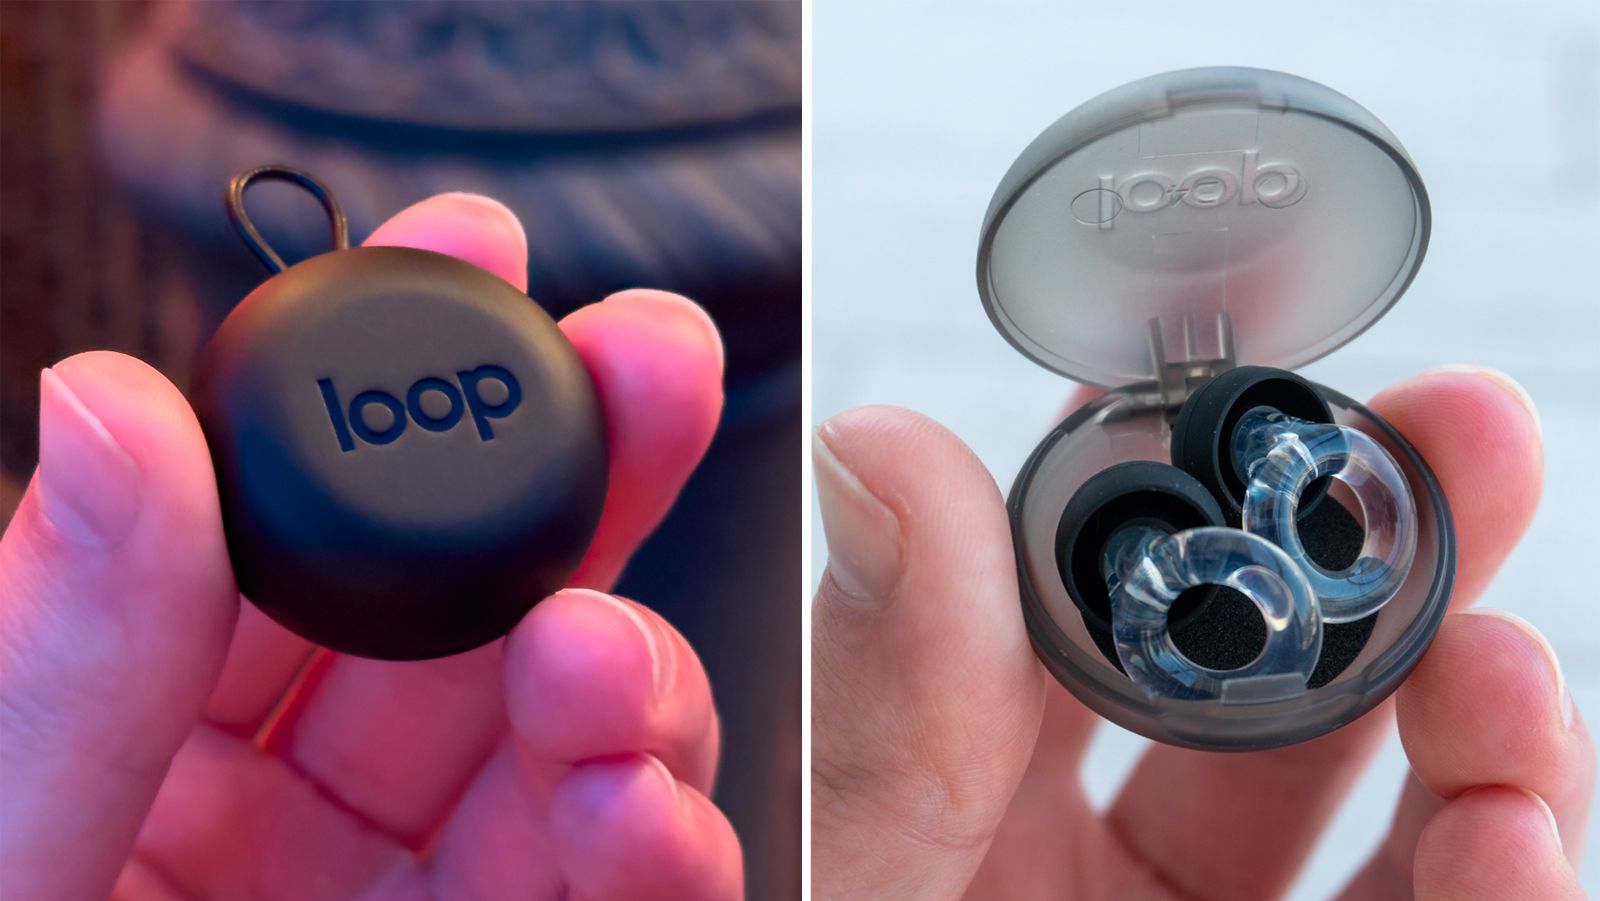 I spent 3 days in New York with Loop earplugs — and it was delightful